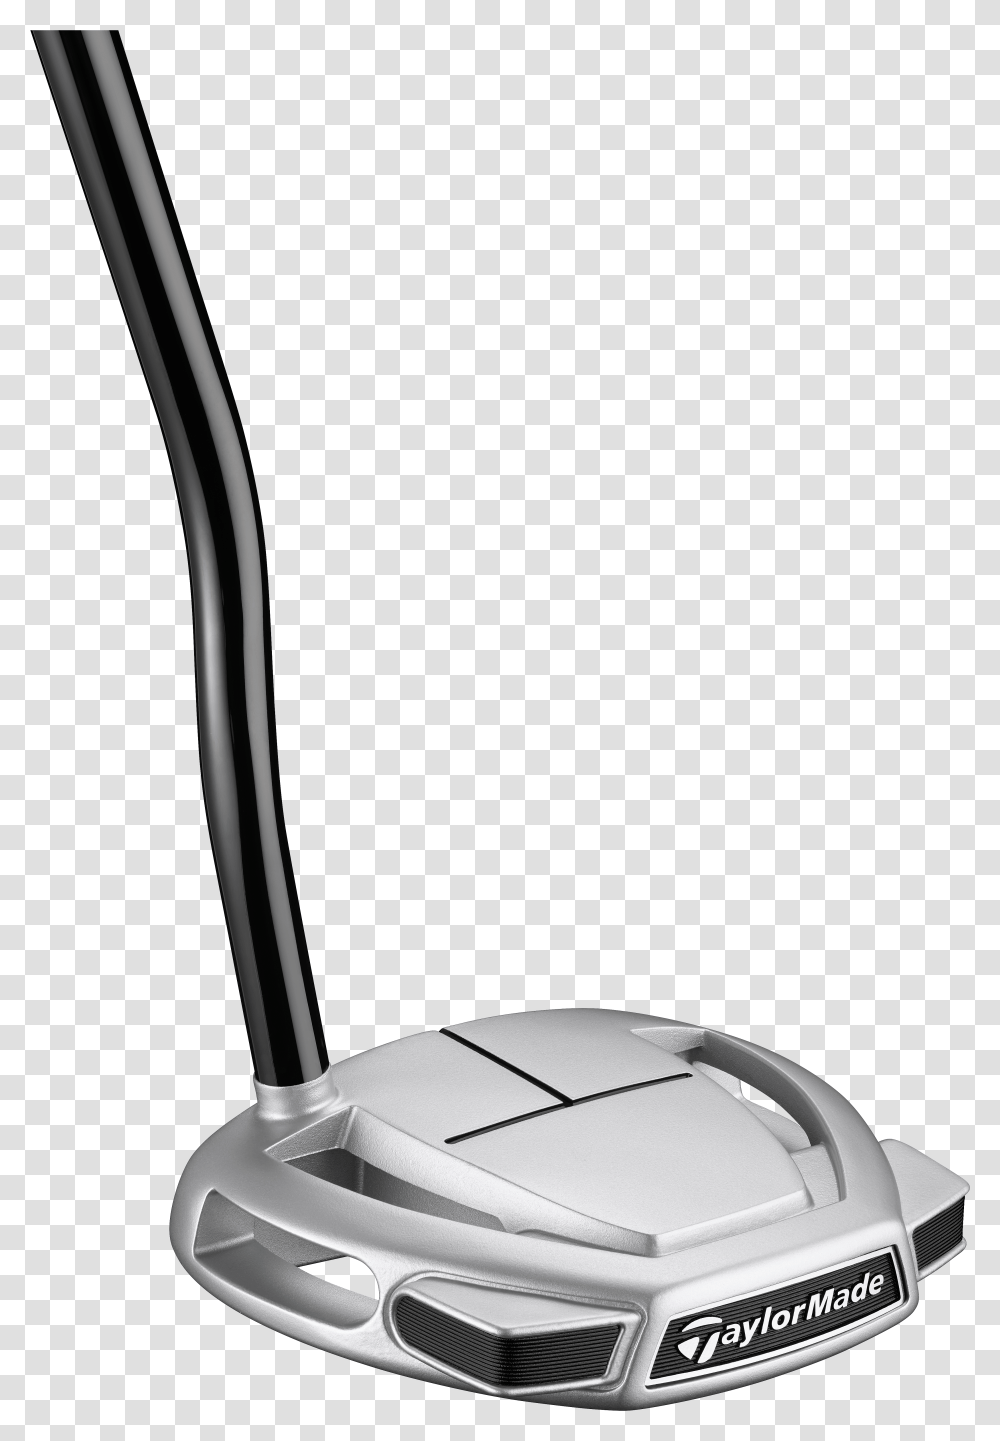 Taylormade Spider Mini Putter Transparent Png